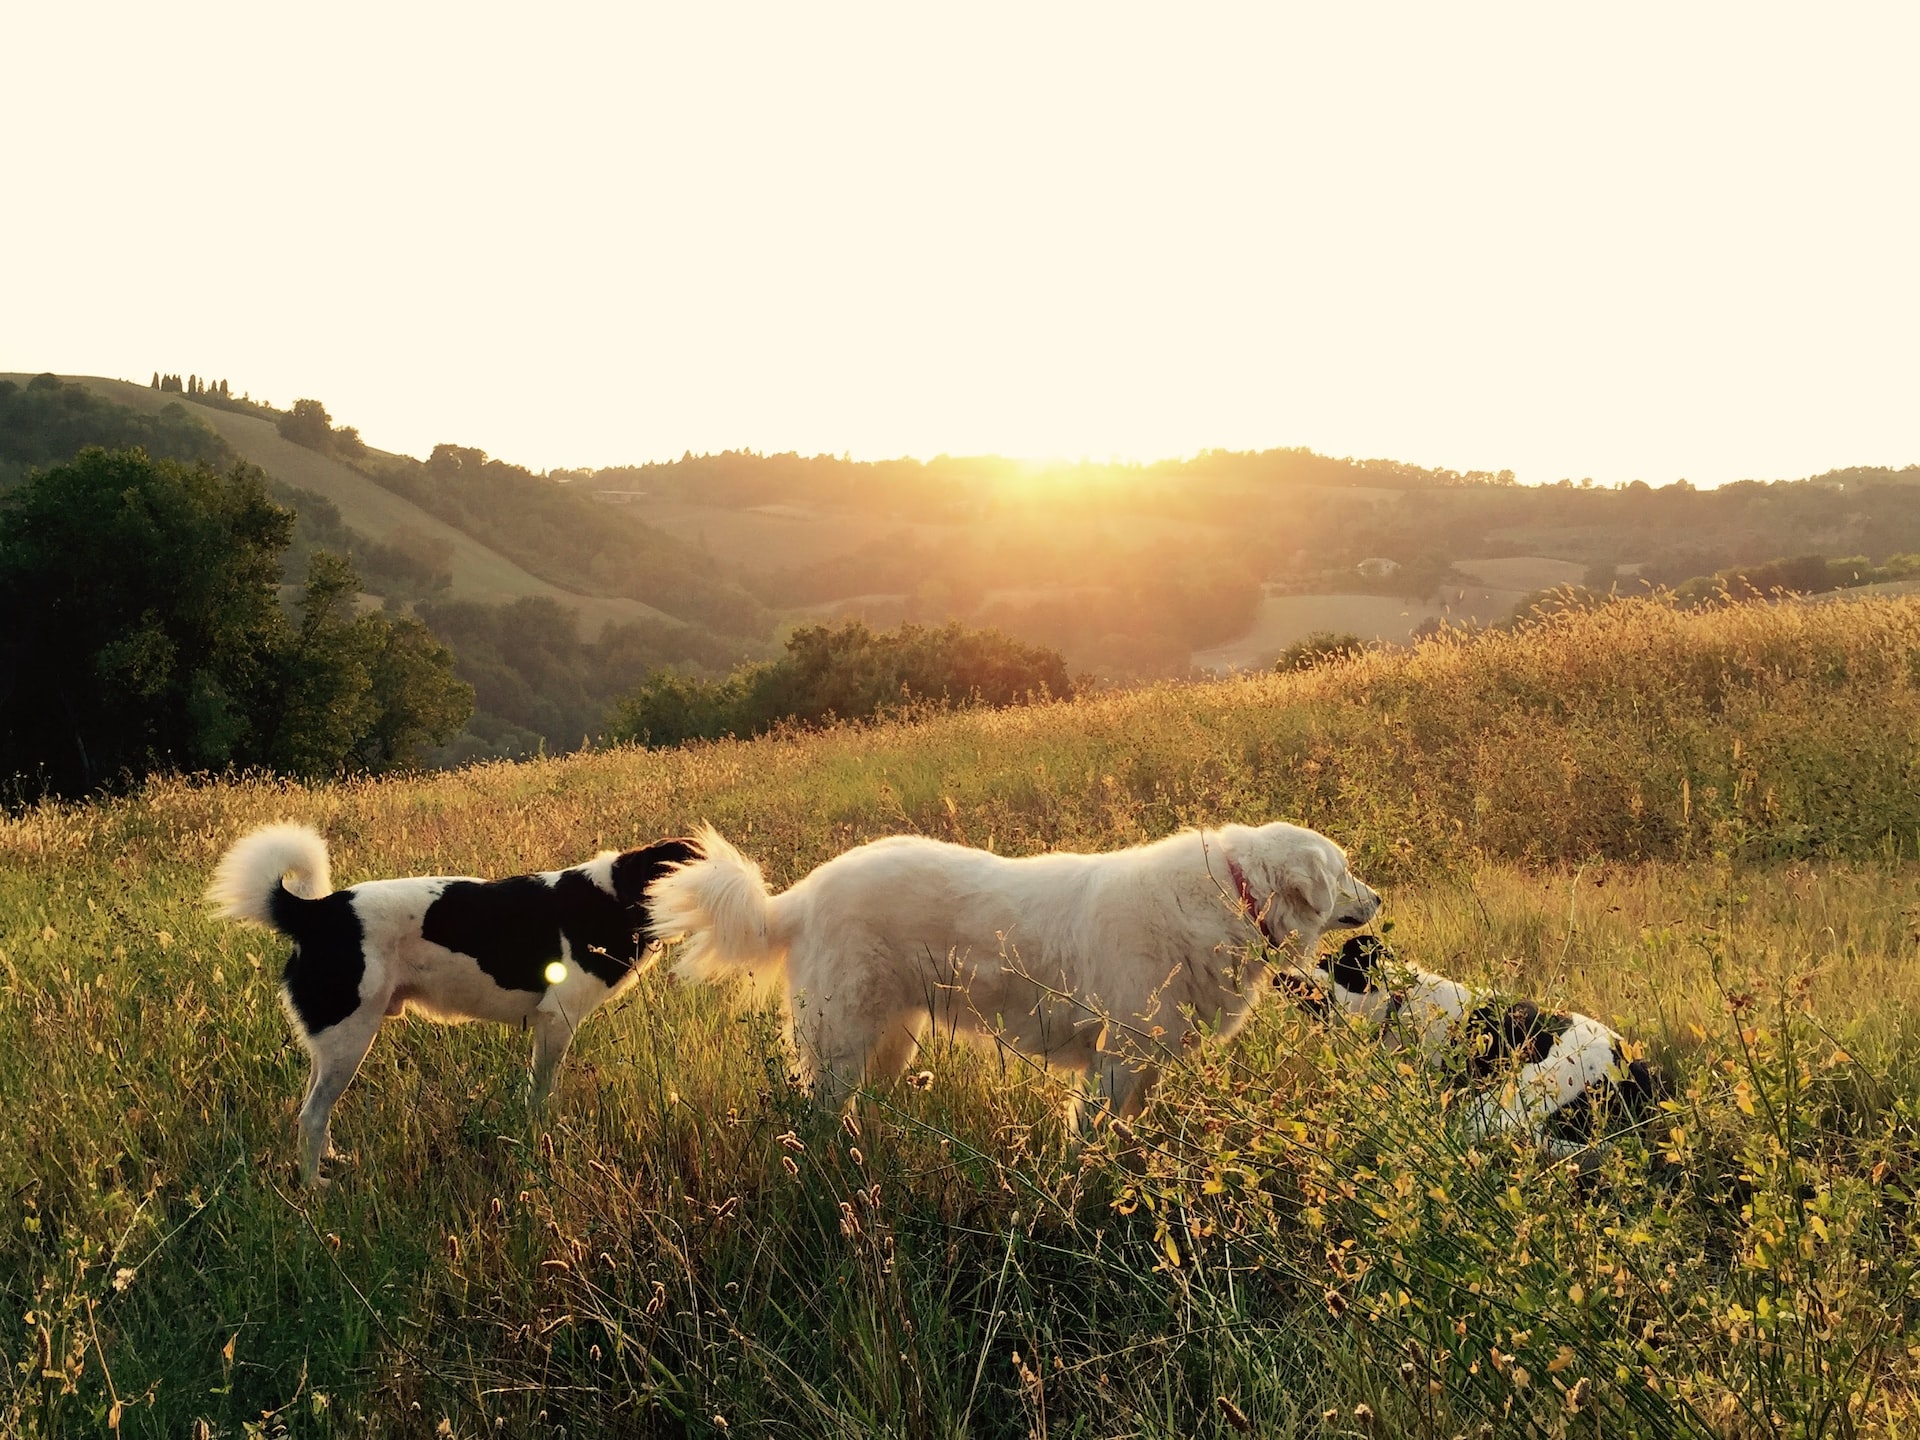 Three dogs standing next to each other in a meadow during sunset